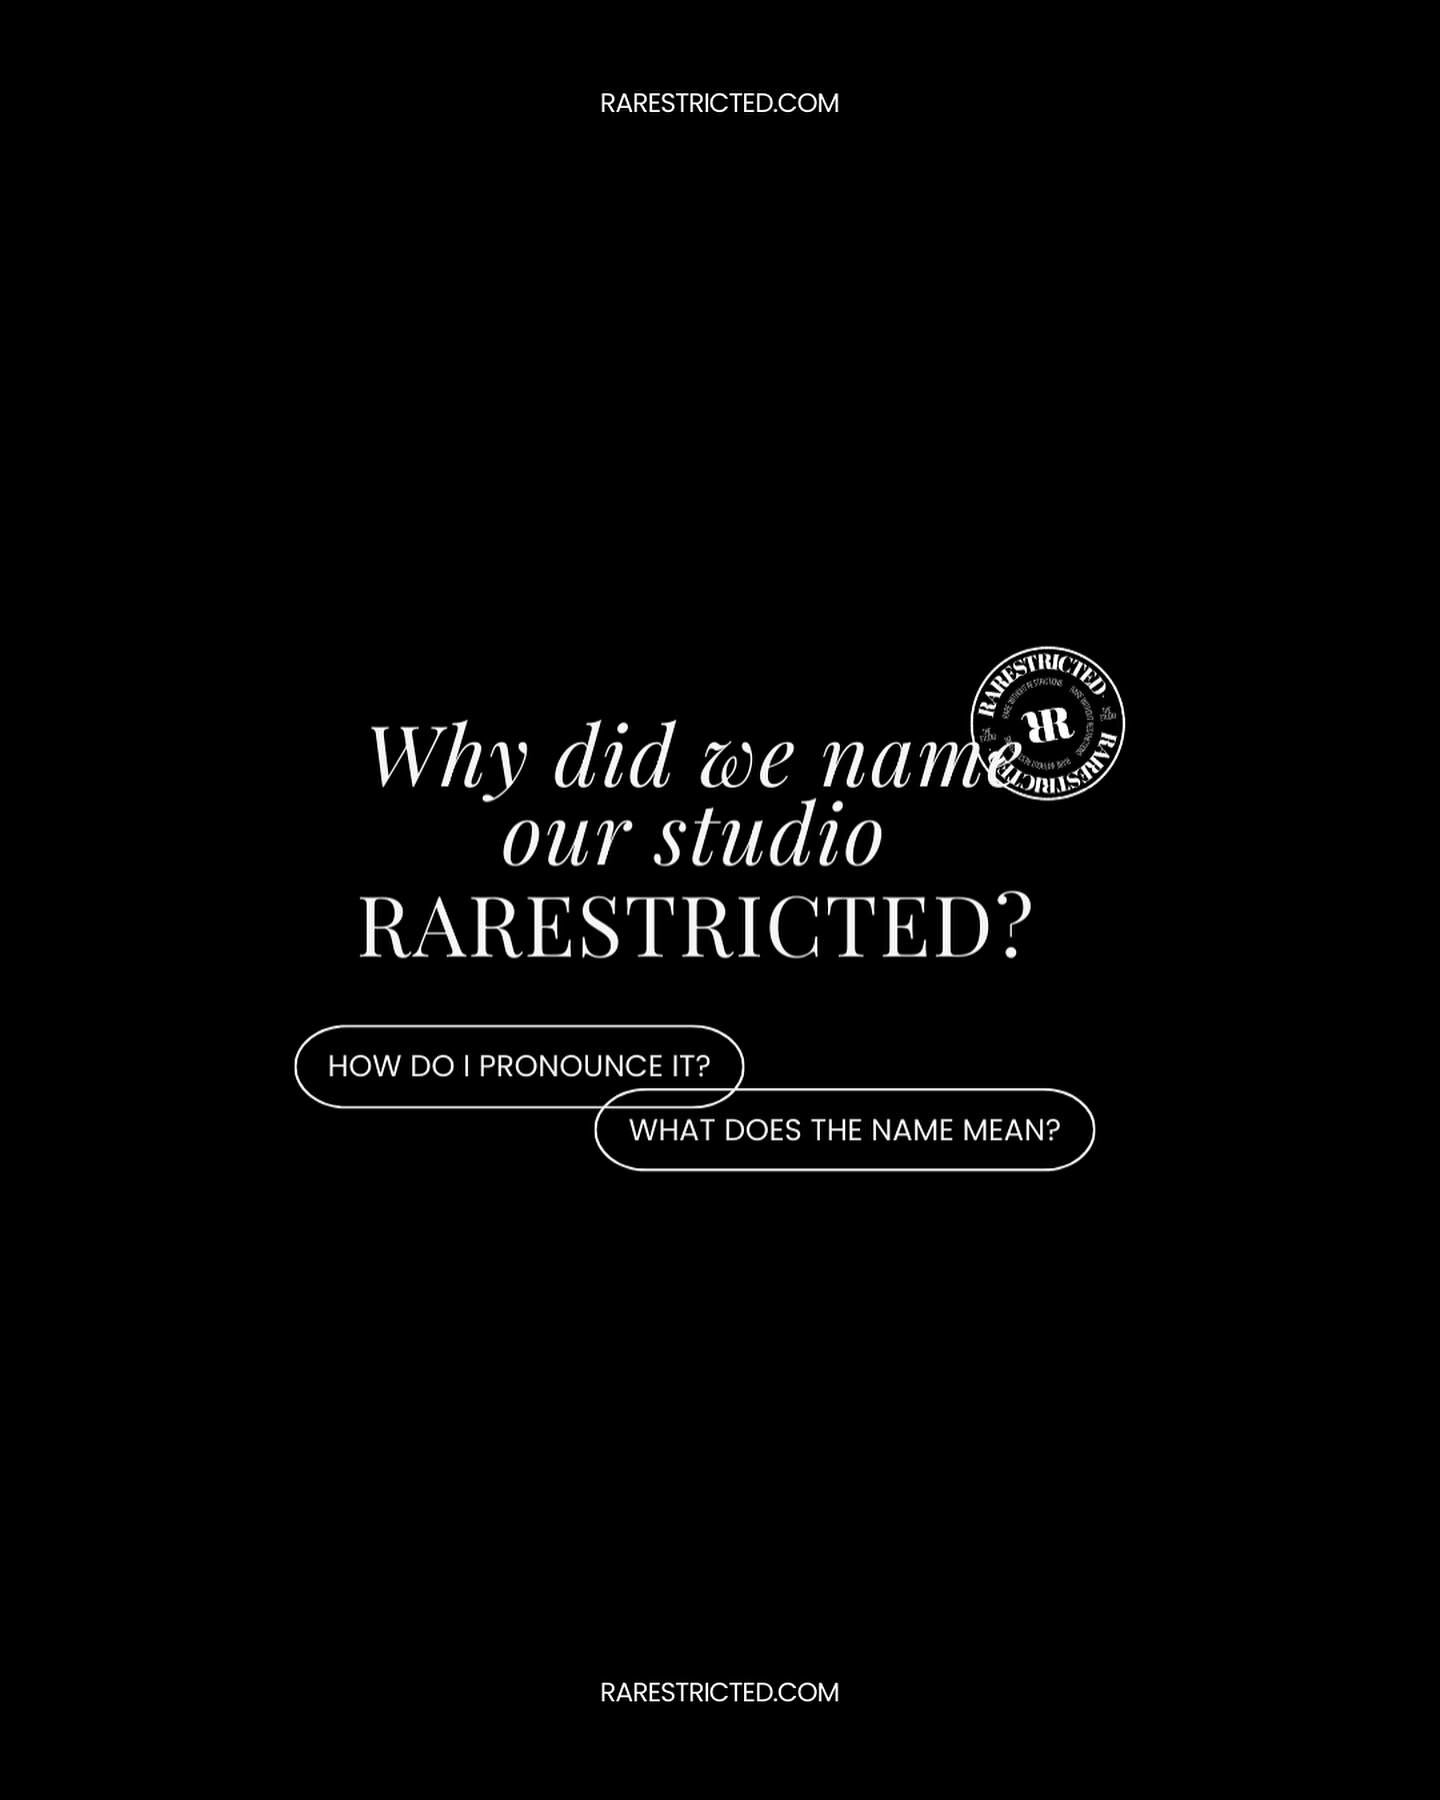 Pronounced &lsquo;rer-strict-ed,&rsquo; our name encapsulates our ethos &mdash; unusually good, remarkably unrestricted. 

Bringing on the potential of our name; a fusion of RARE, symbolizing our commitment to exceptional creativity, and unreSTRICTED